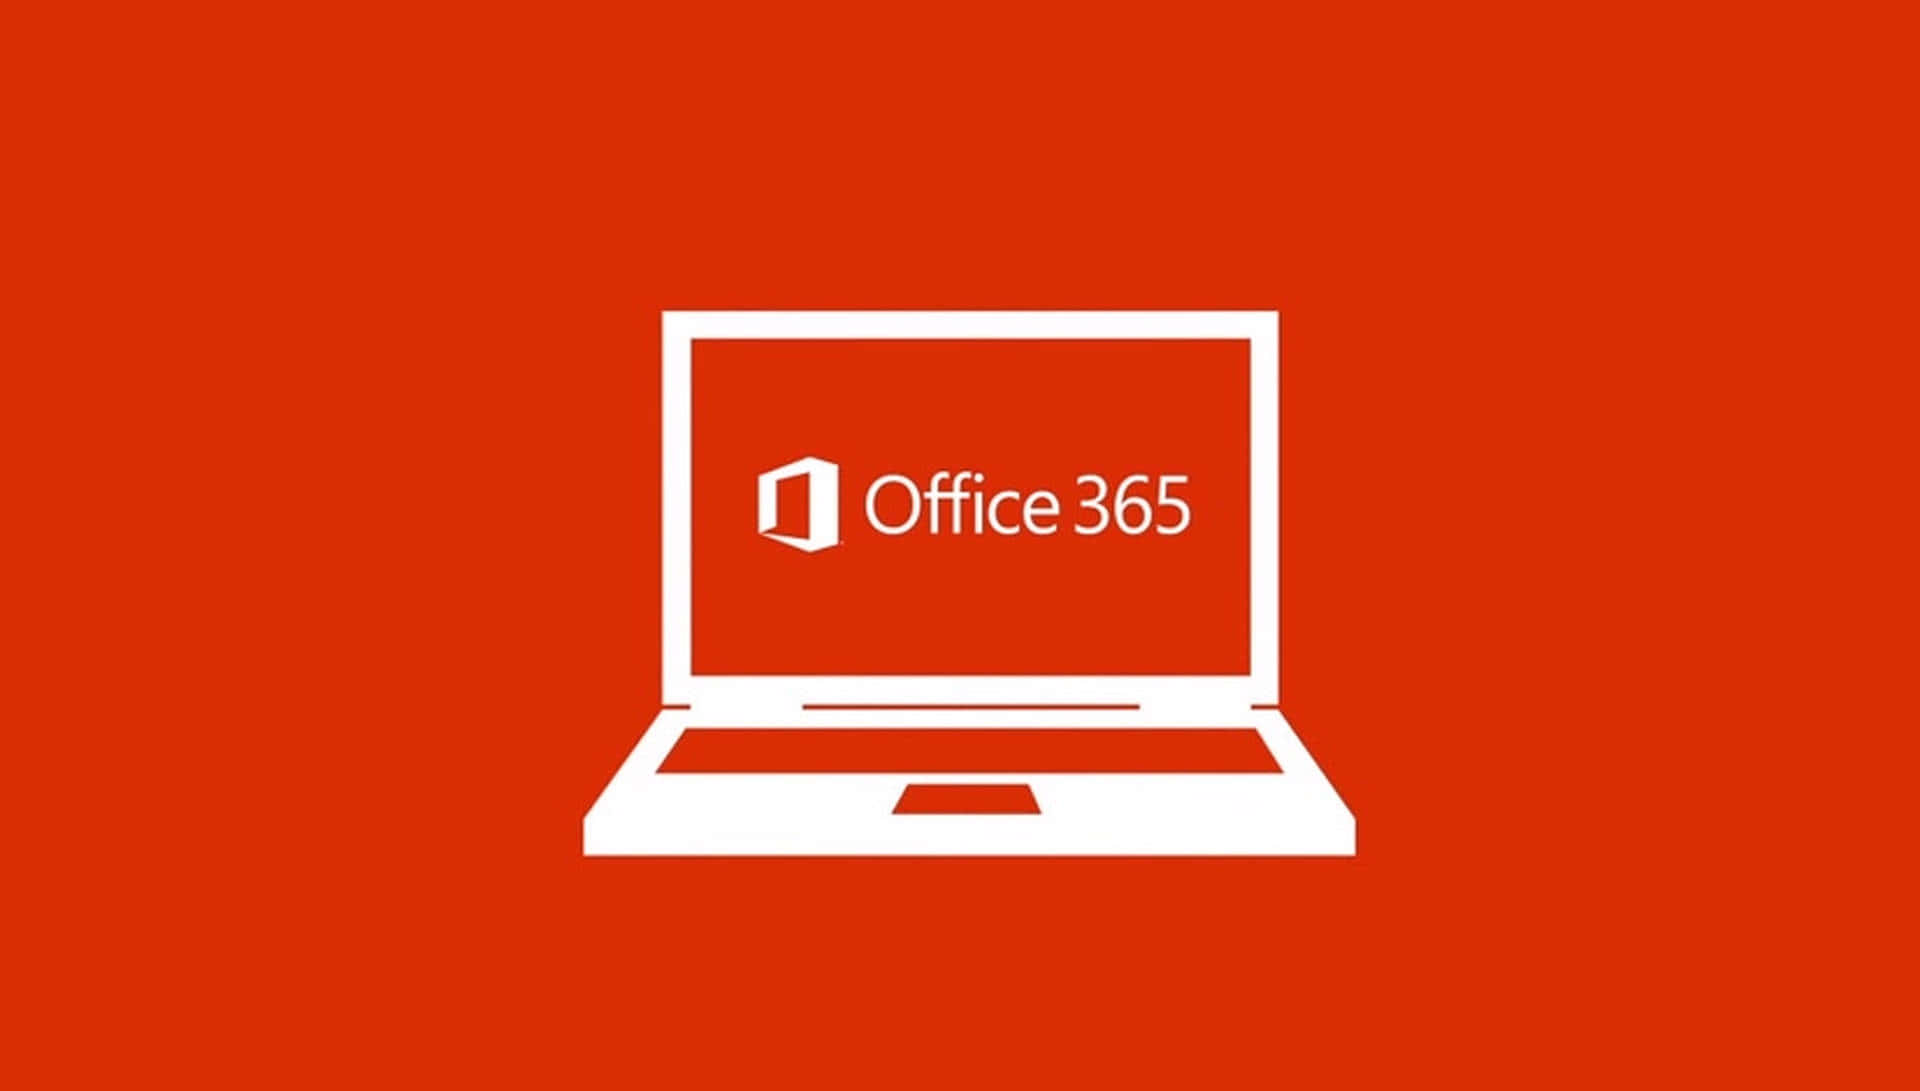 Office 365 Logo On A Red Background